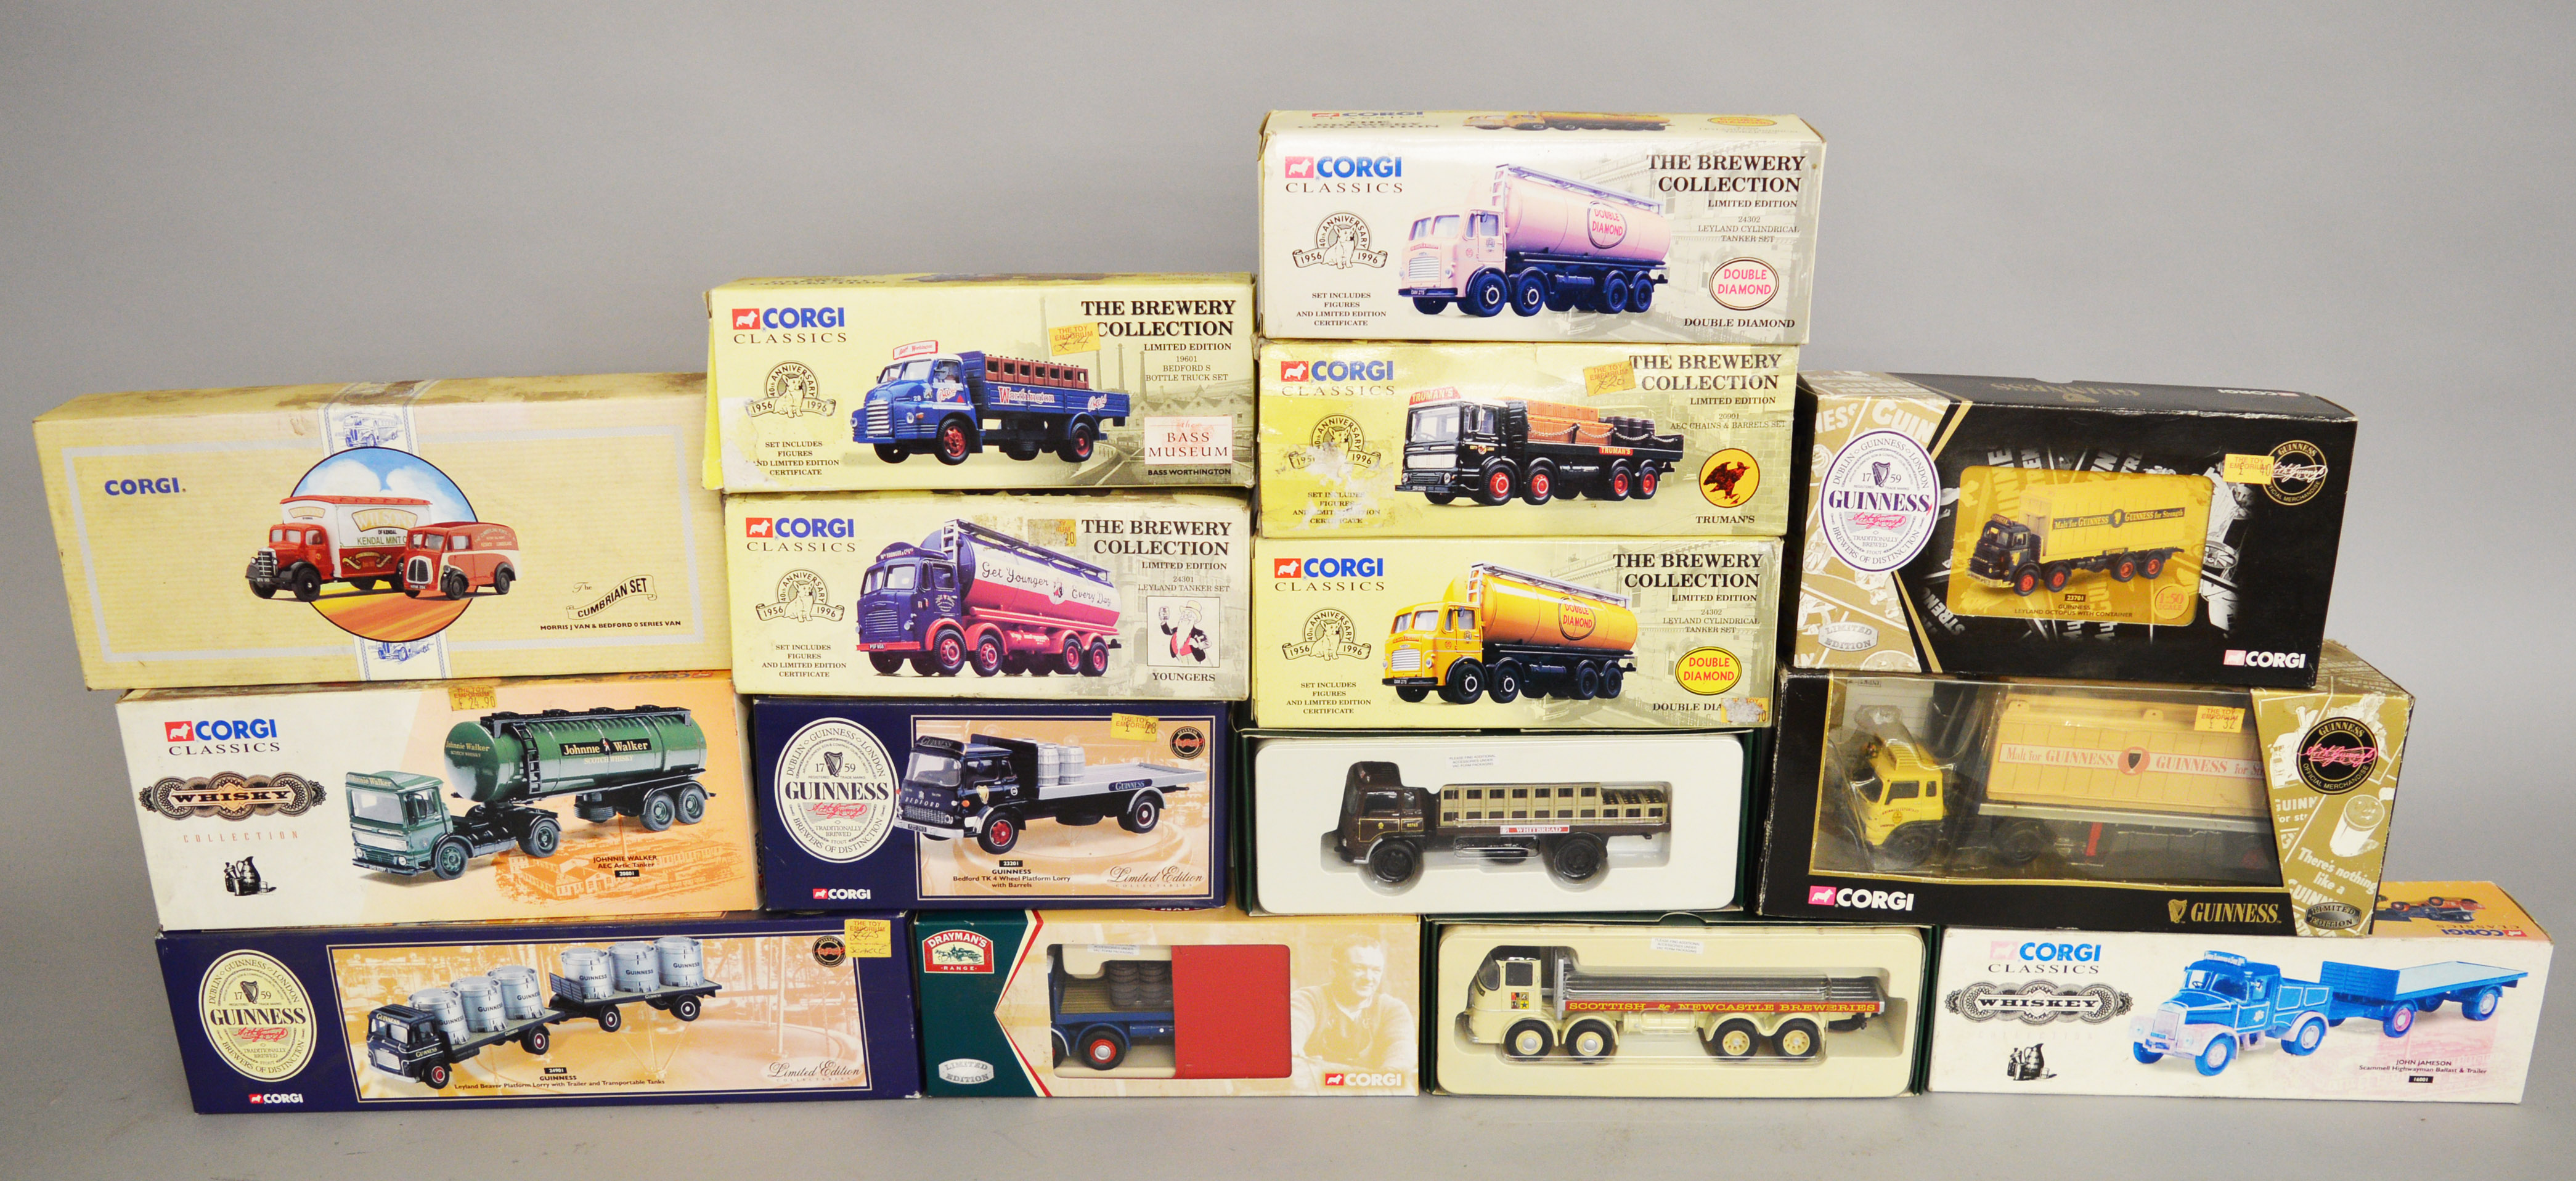 Thirteen boxed Corgi limited edition Brewery and Distillery related diecast truck models from